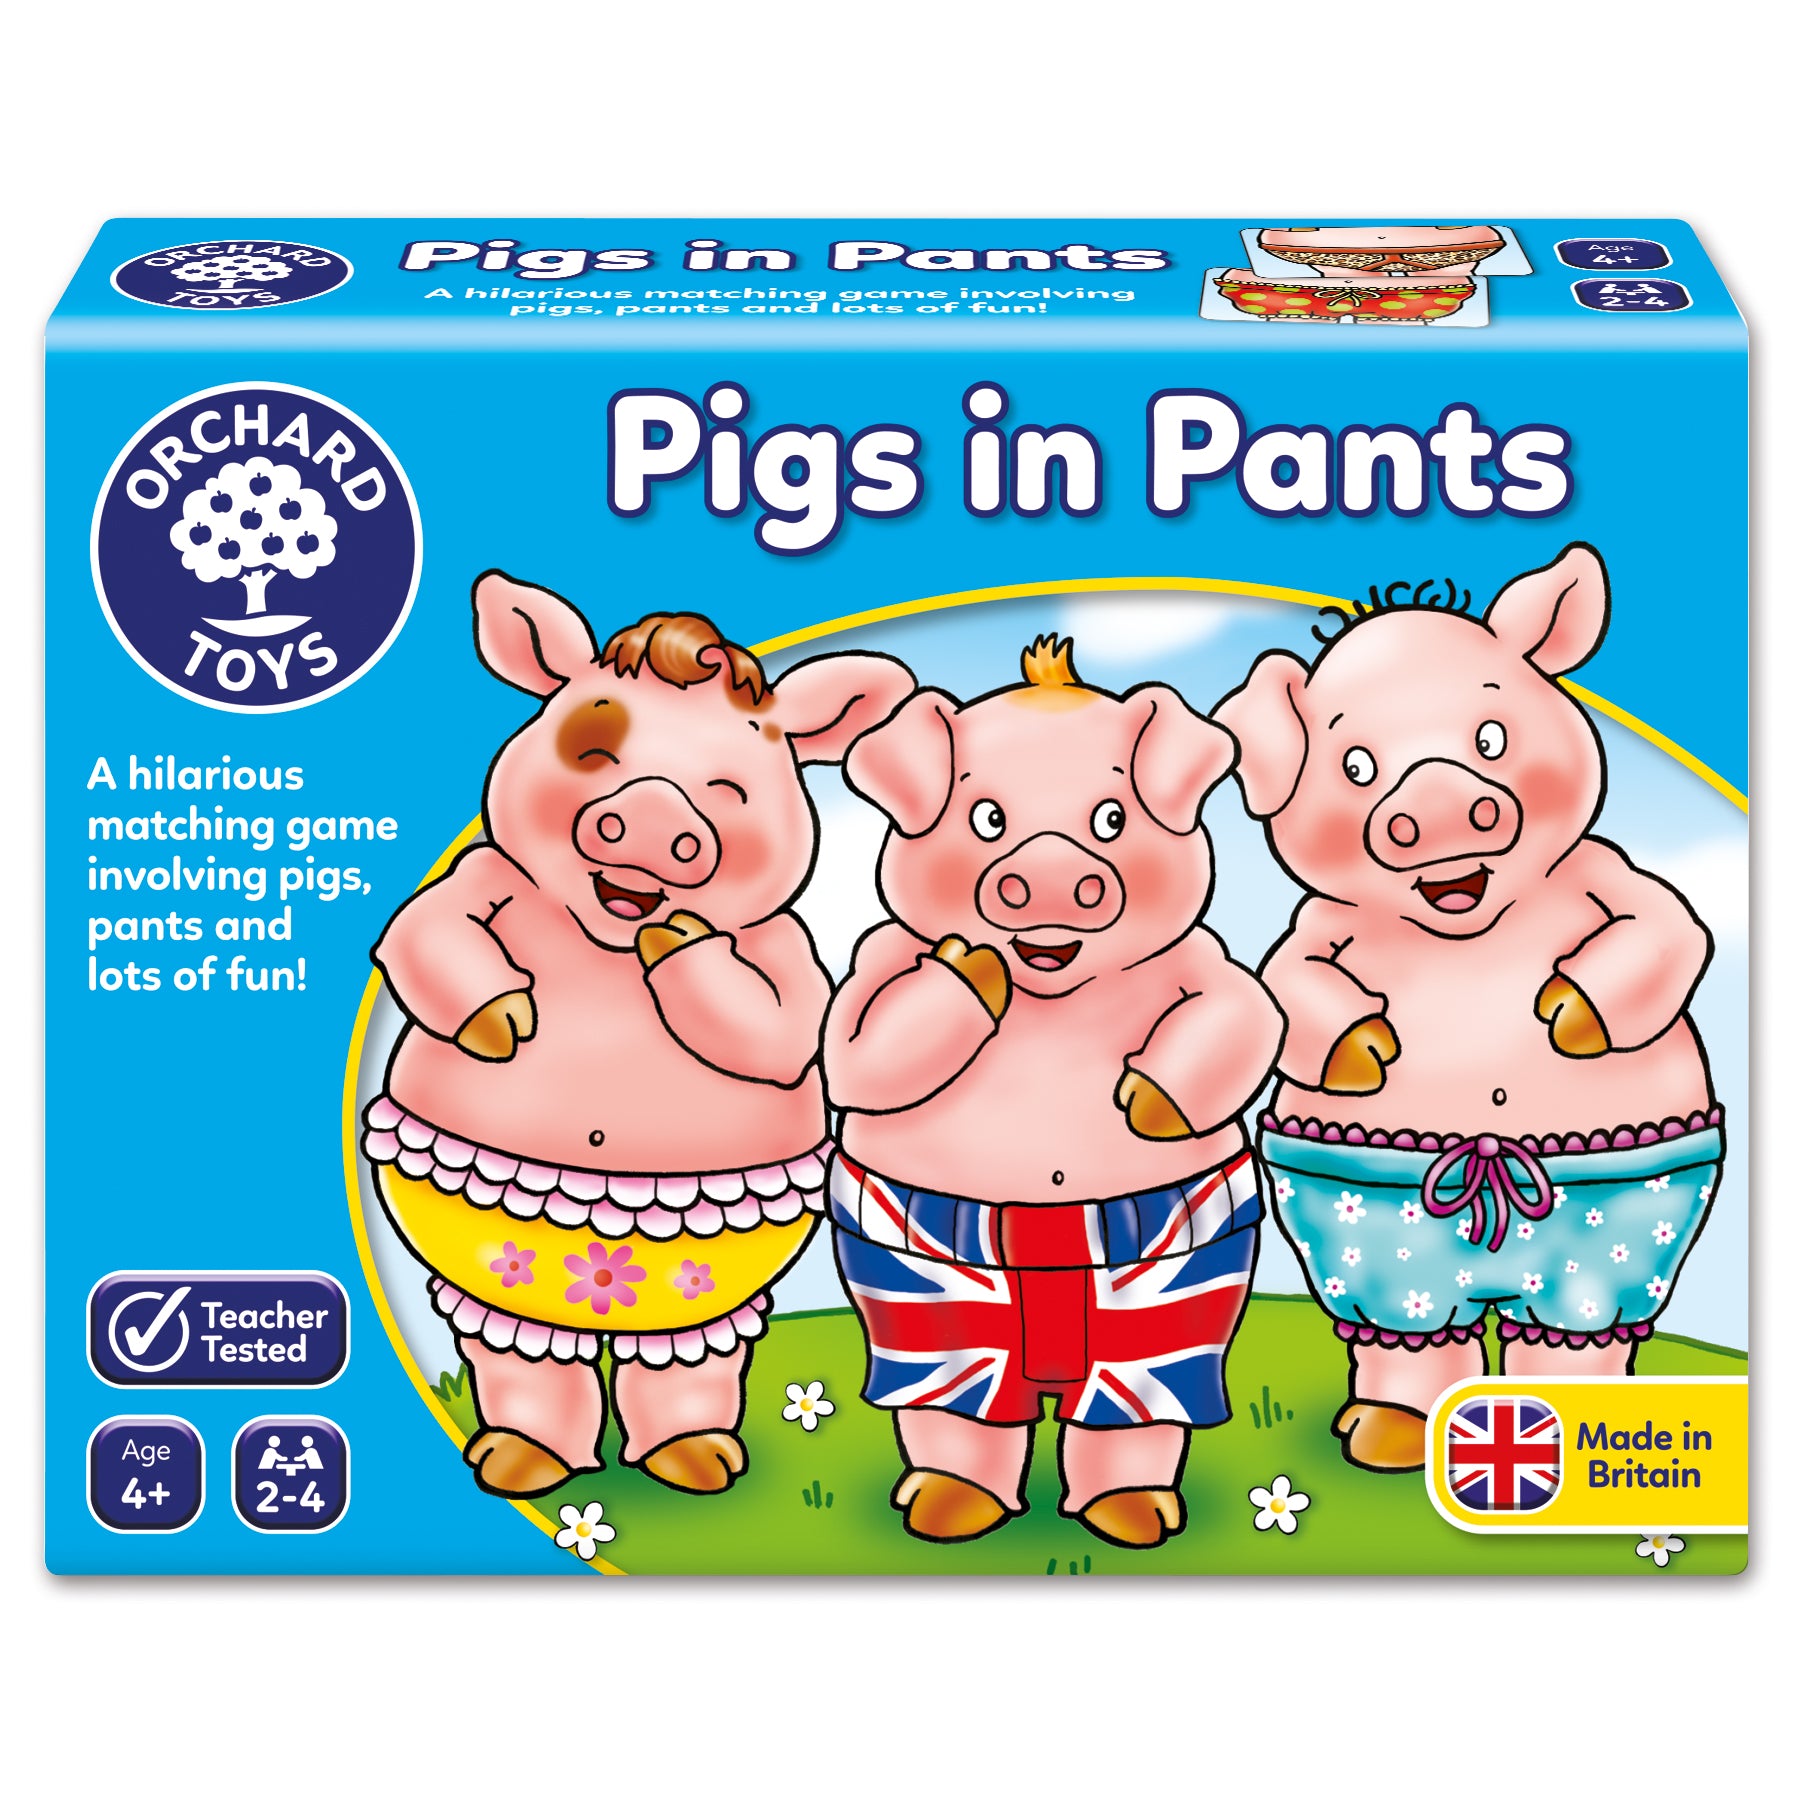 Orchard Pigs In Pants